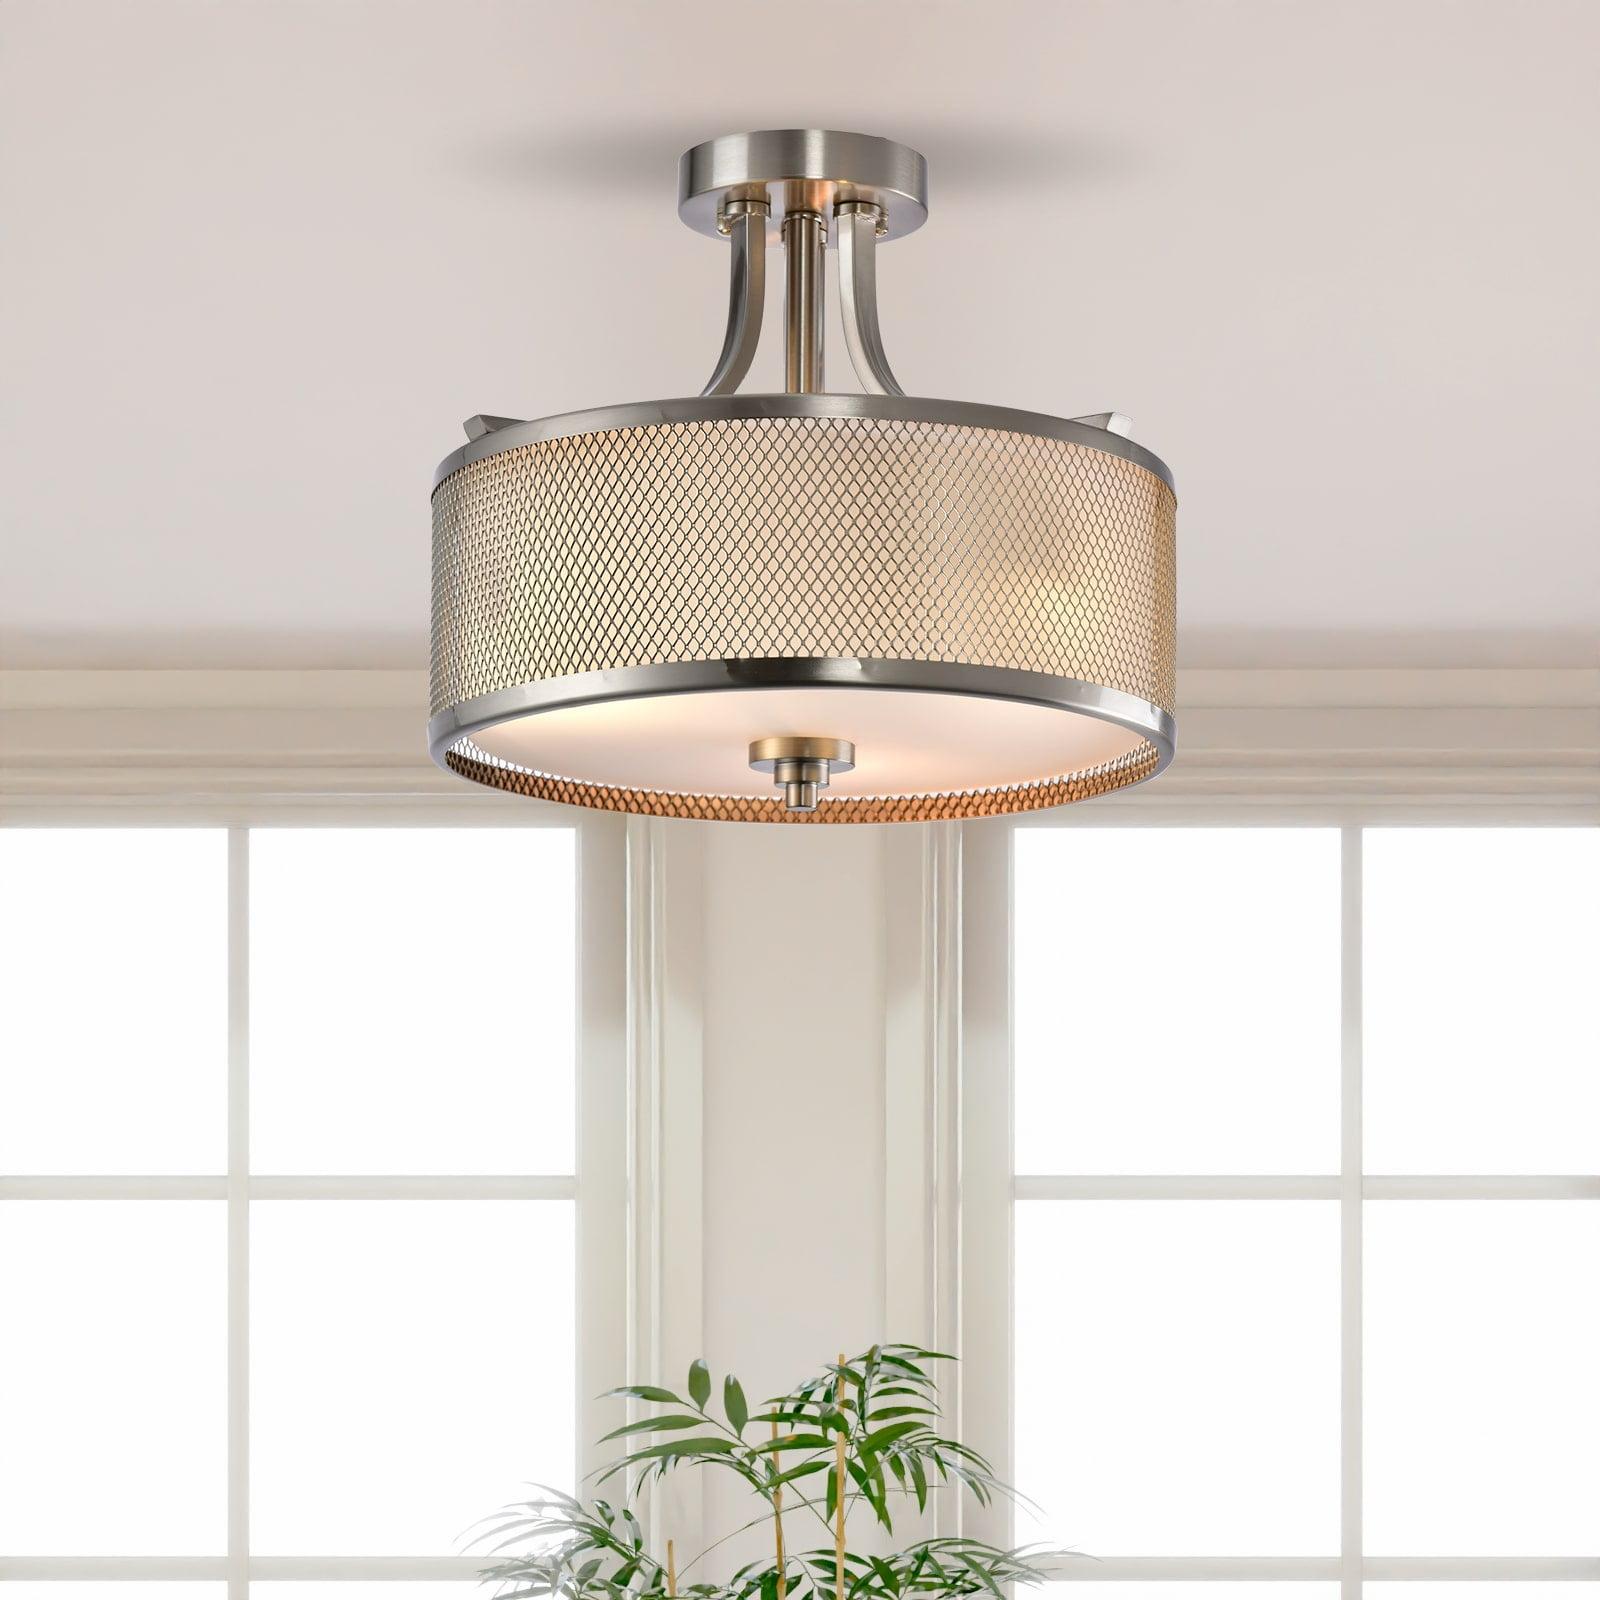 Satin Nickel 3-Light Drum Semi-Flush Mount Ceiling Light with Frosted Glass